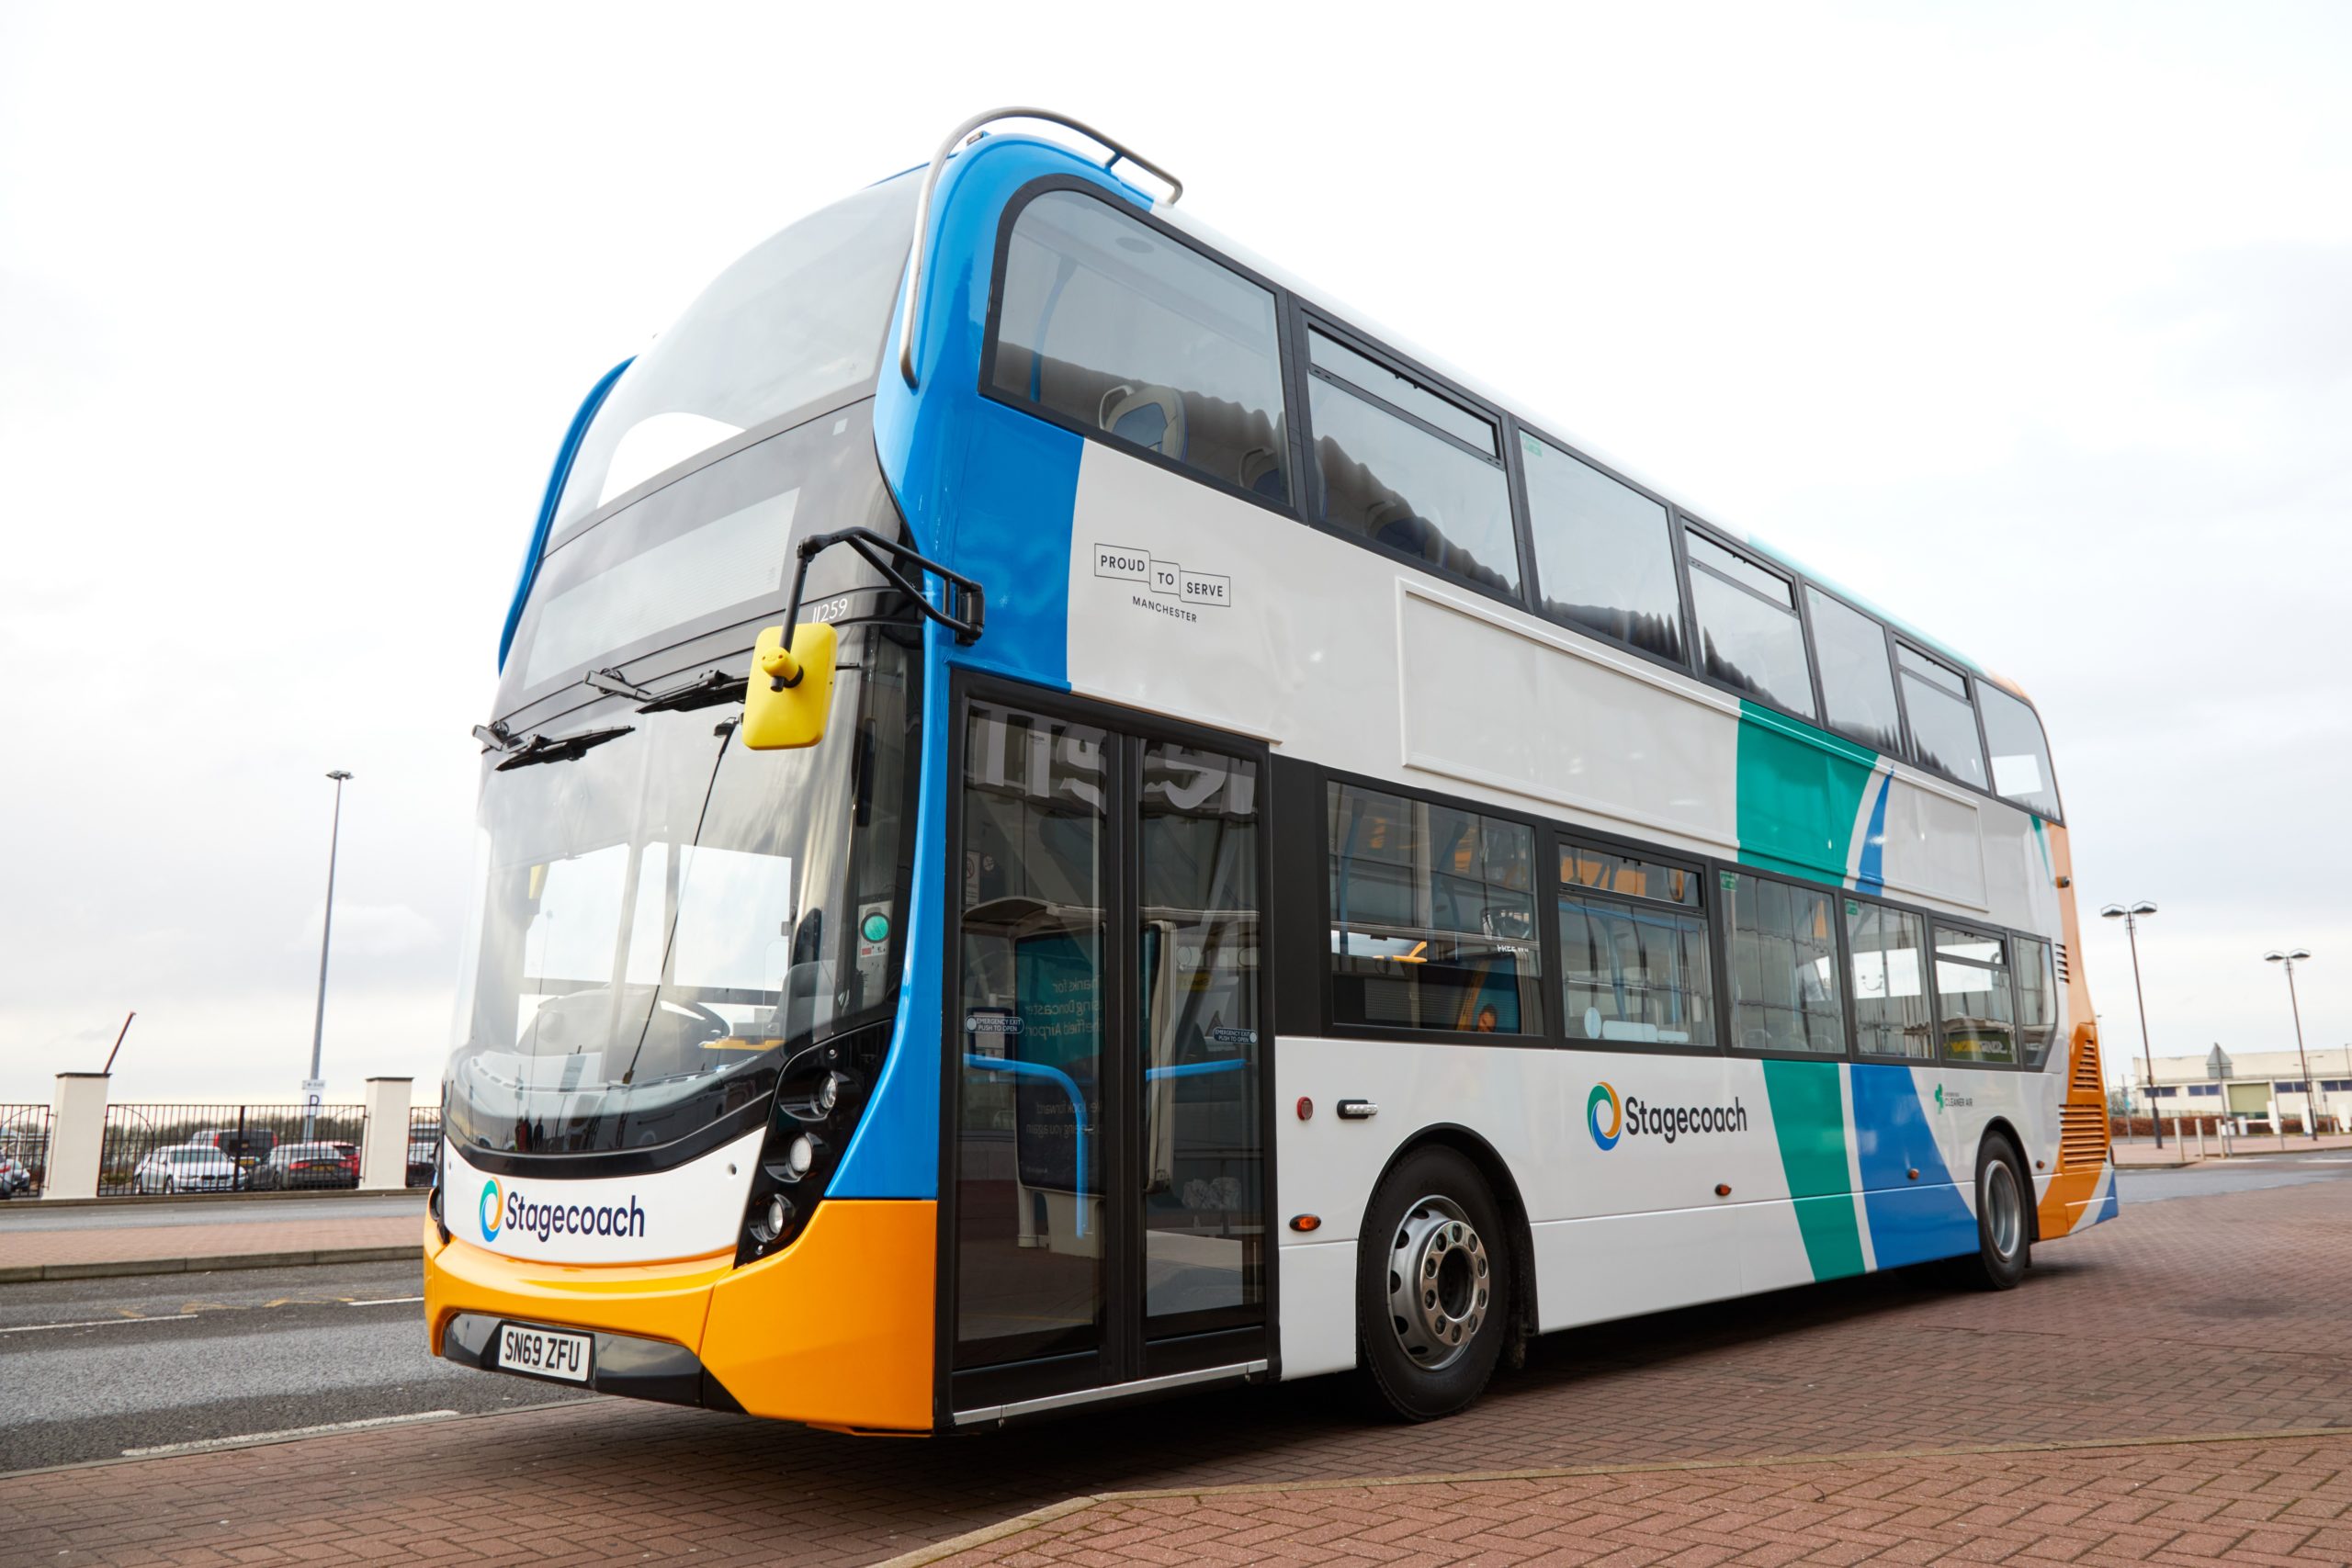 NHS staff to benefit from dedicated bus service Hull CC News